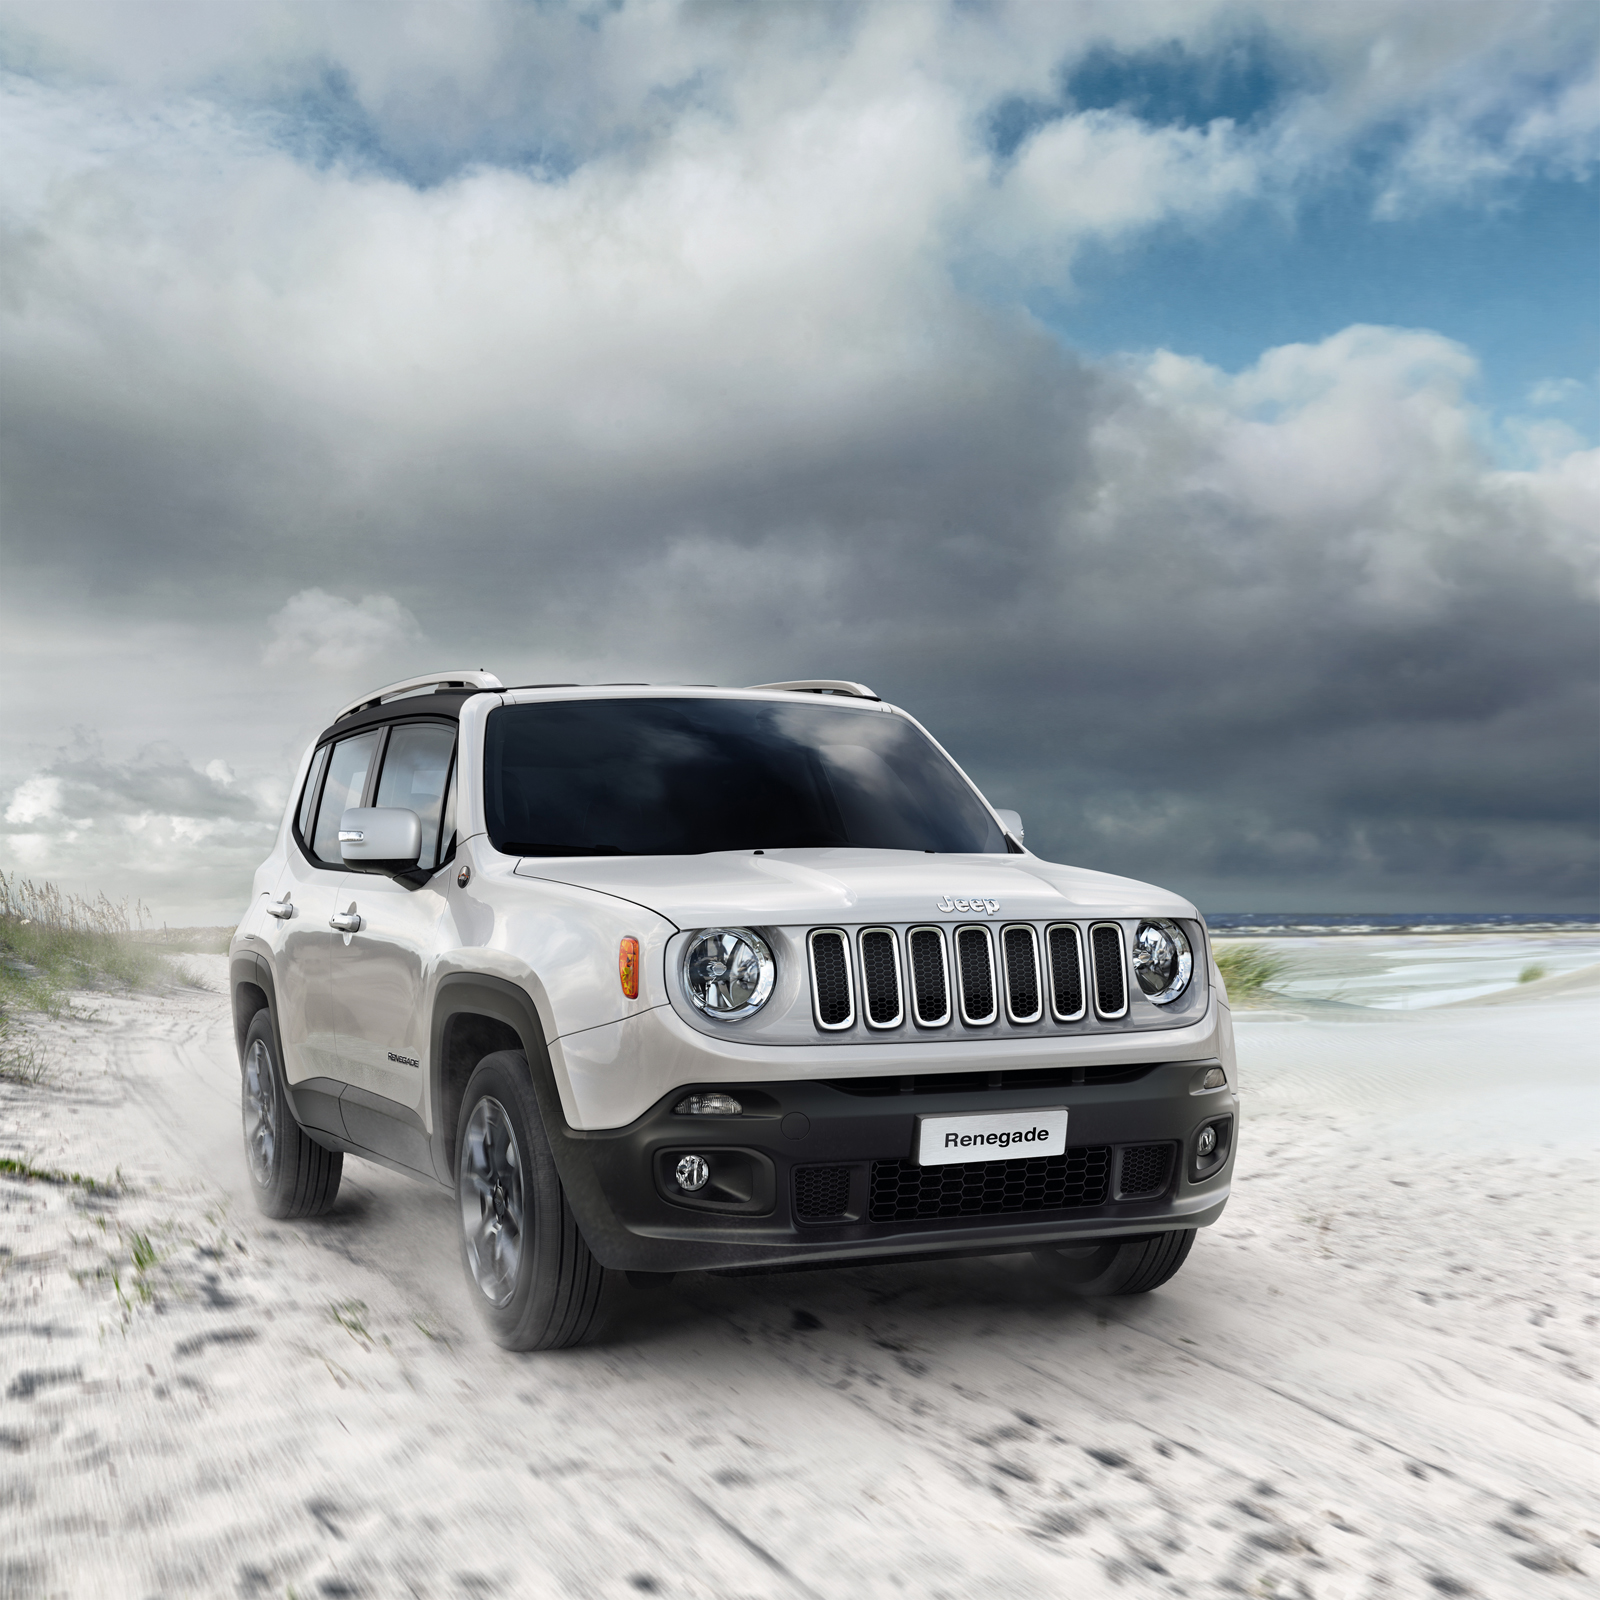 Jeep Details Euro-Spec Renegade, Will Launch in Q4 2014 [129 Pics